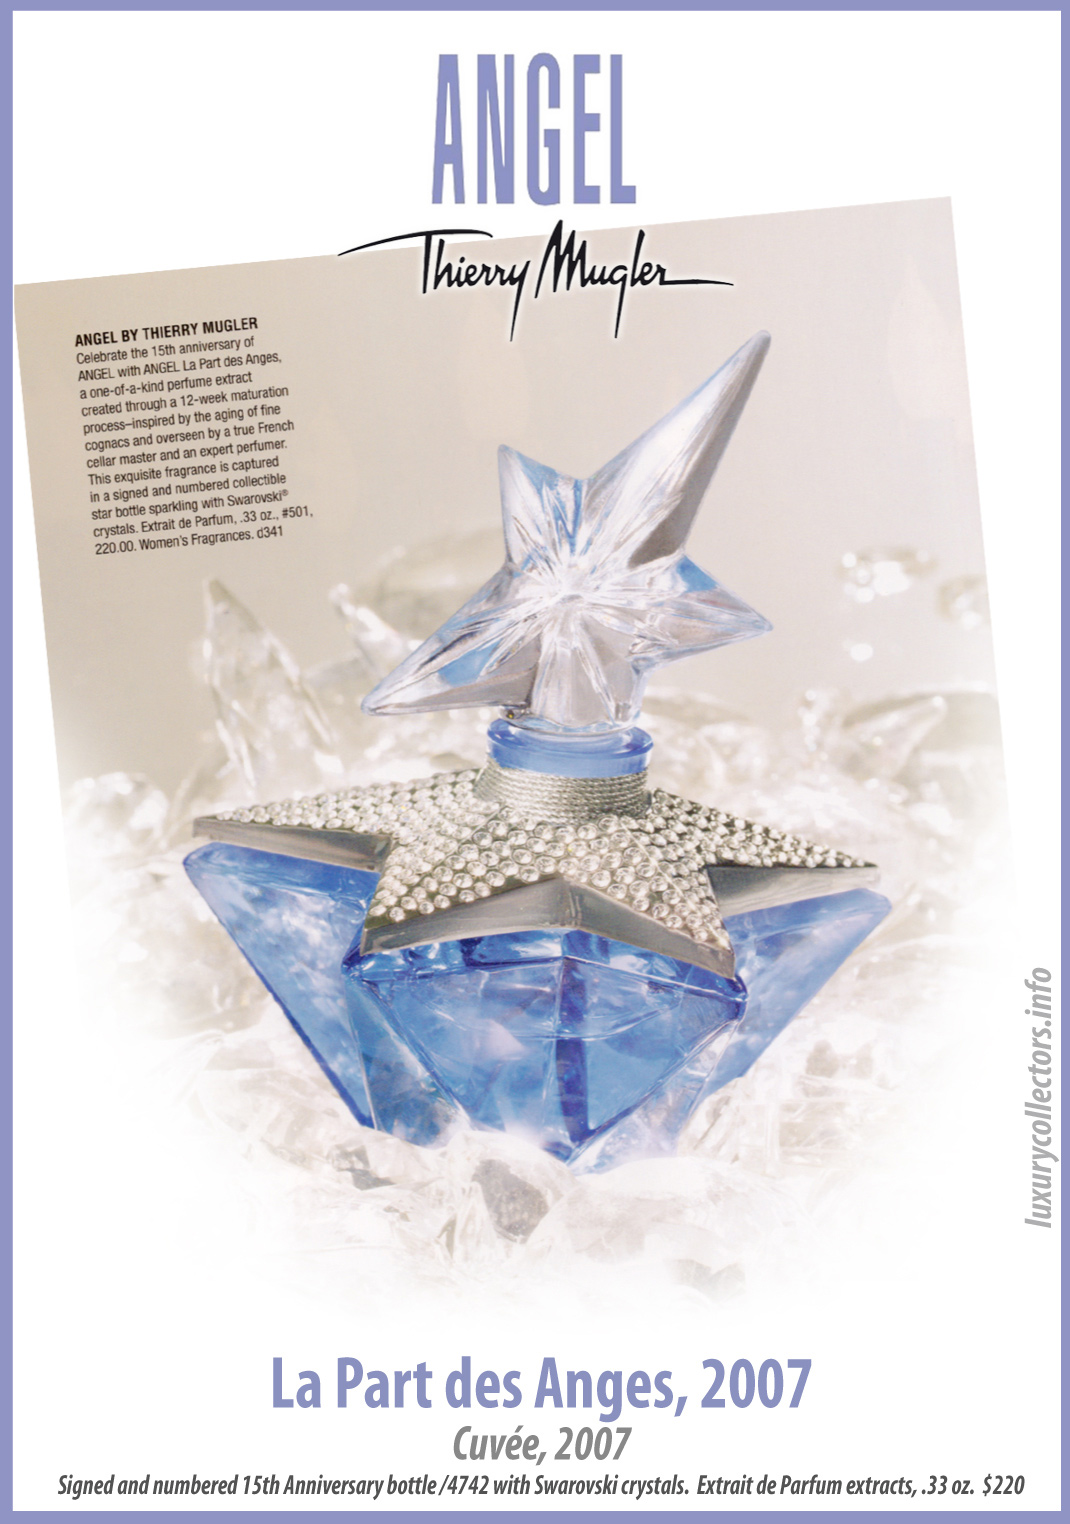 Thierry Mugler Angel 20 Years Perfume Collector's Limited Edition Bottle 2007 La Part des Anges Swrovski